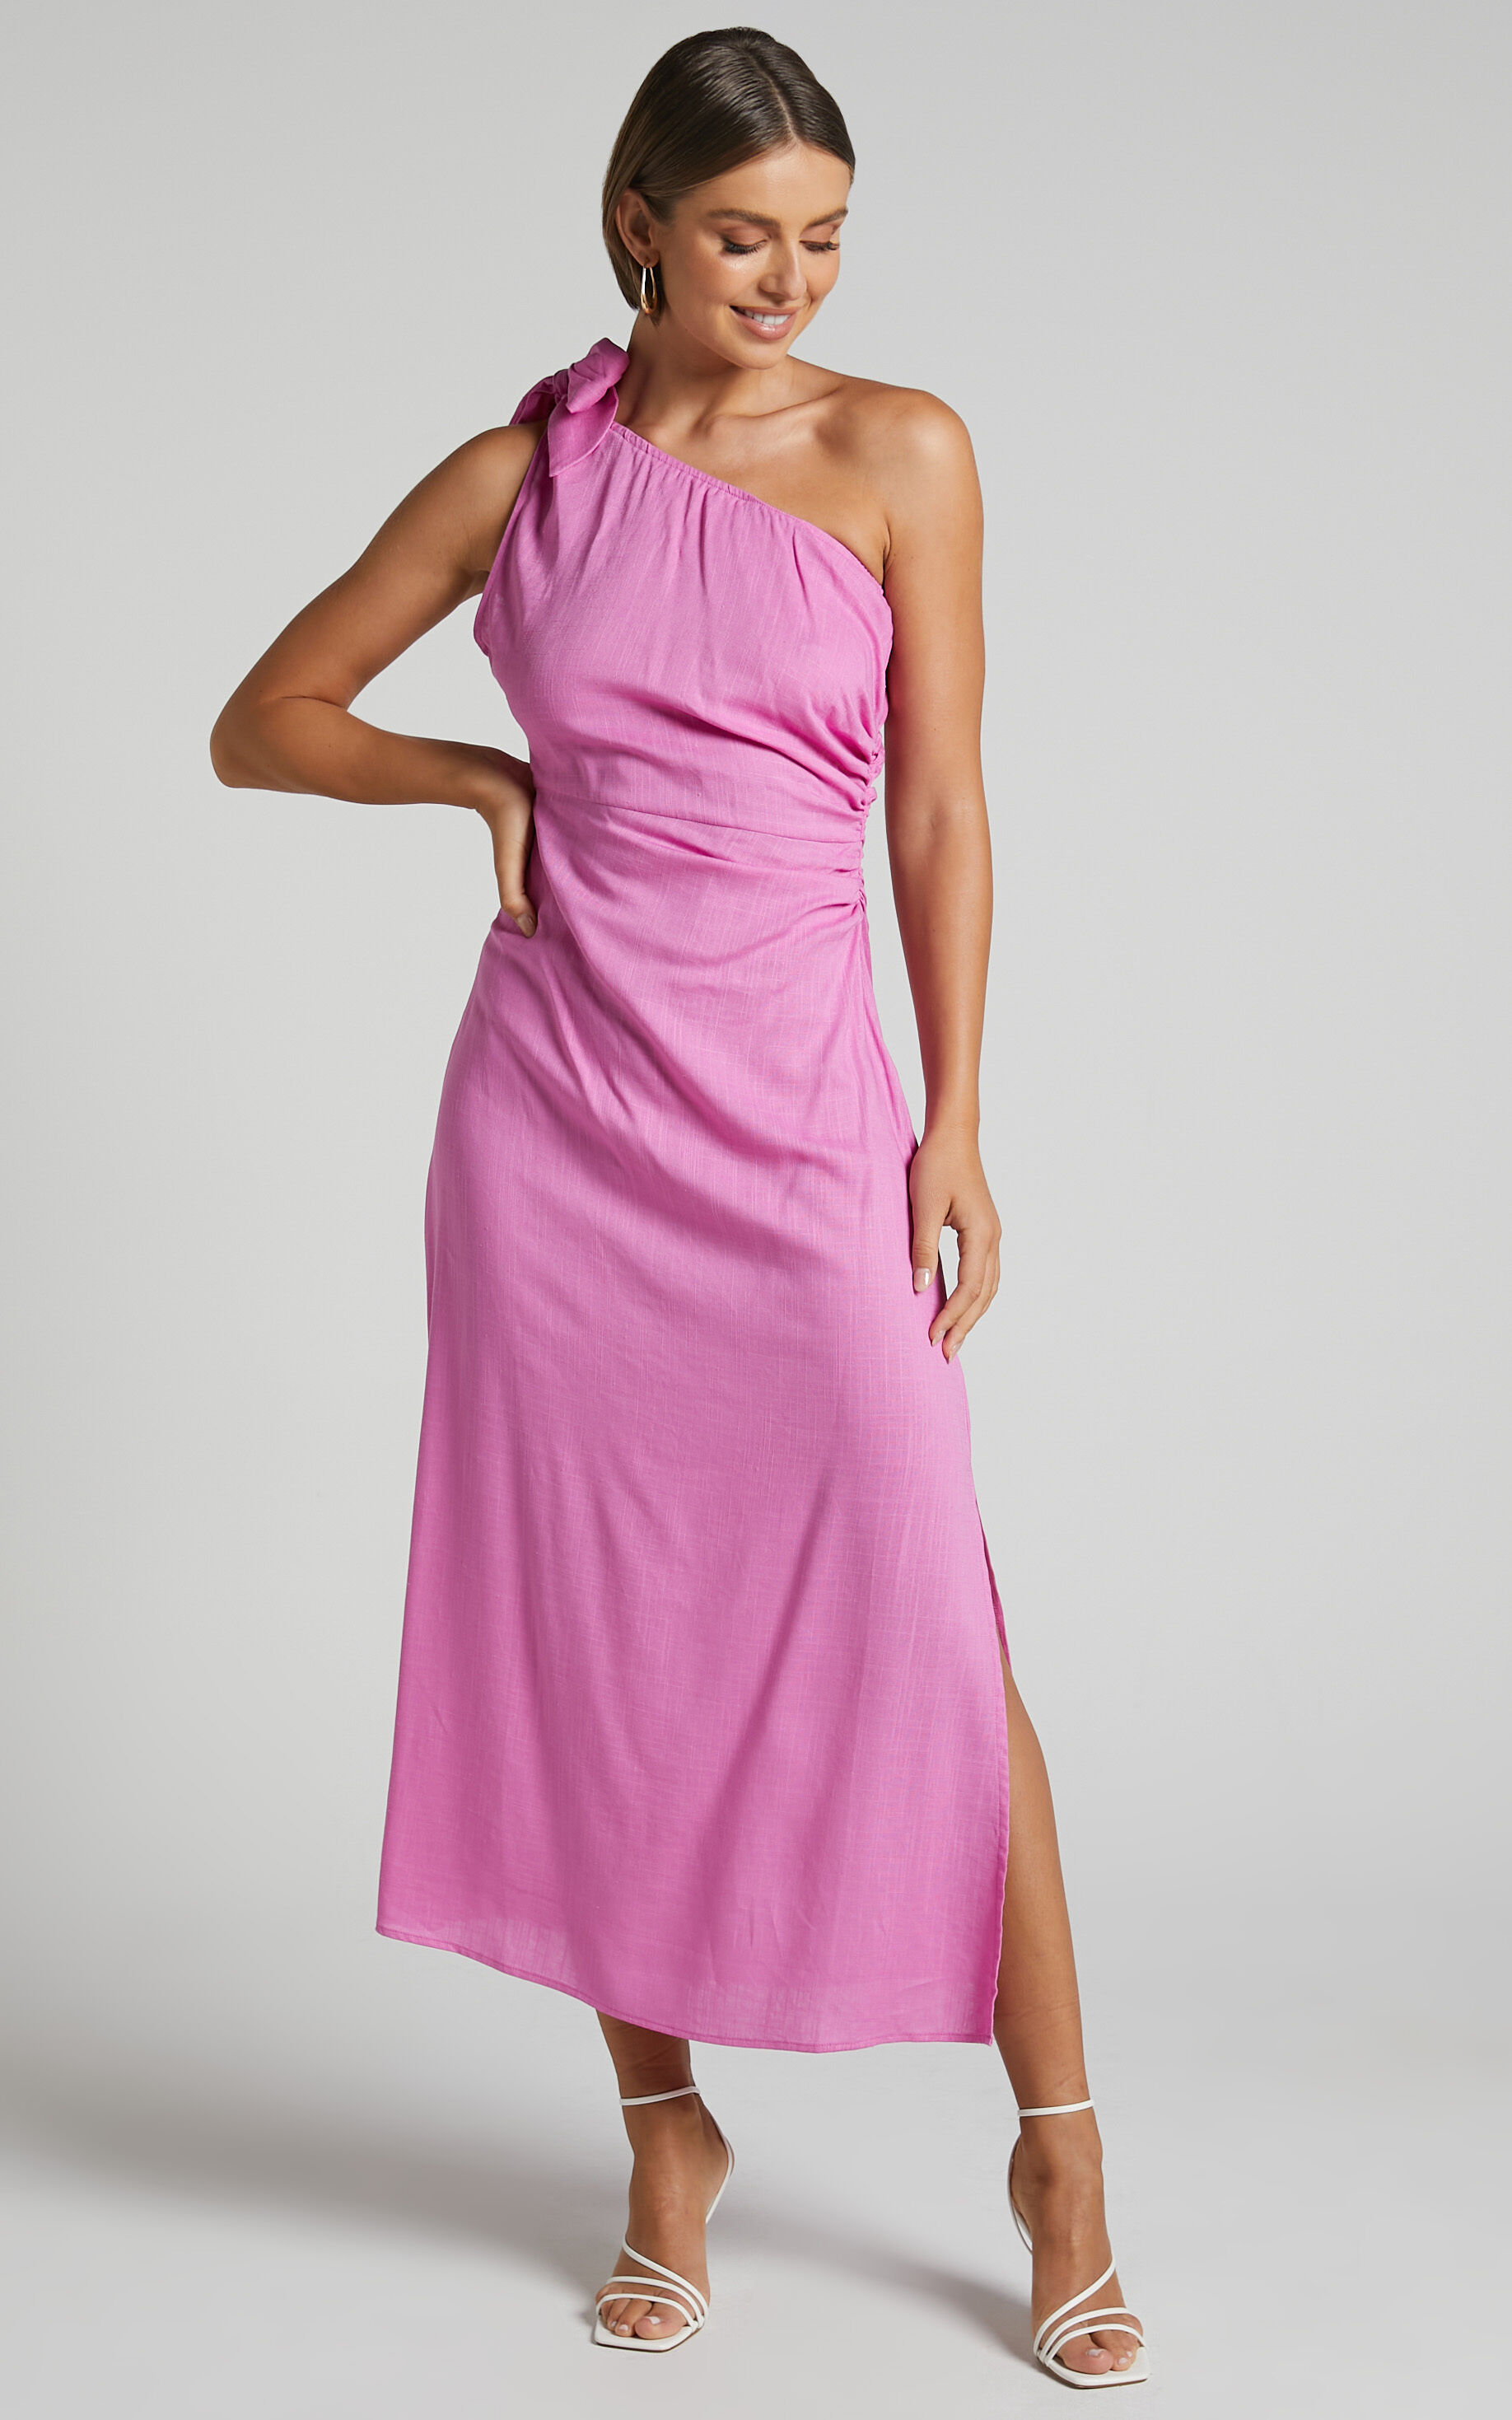 Kiada Maxi Dress - One Shoulder Gathered Dress in Orchid - 06, PRP1, super-hi-res image number null